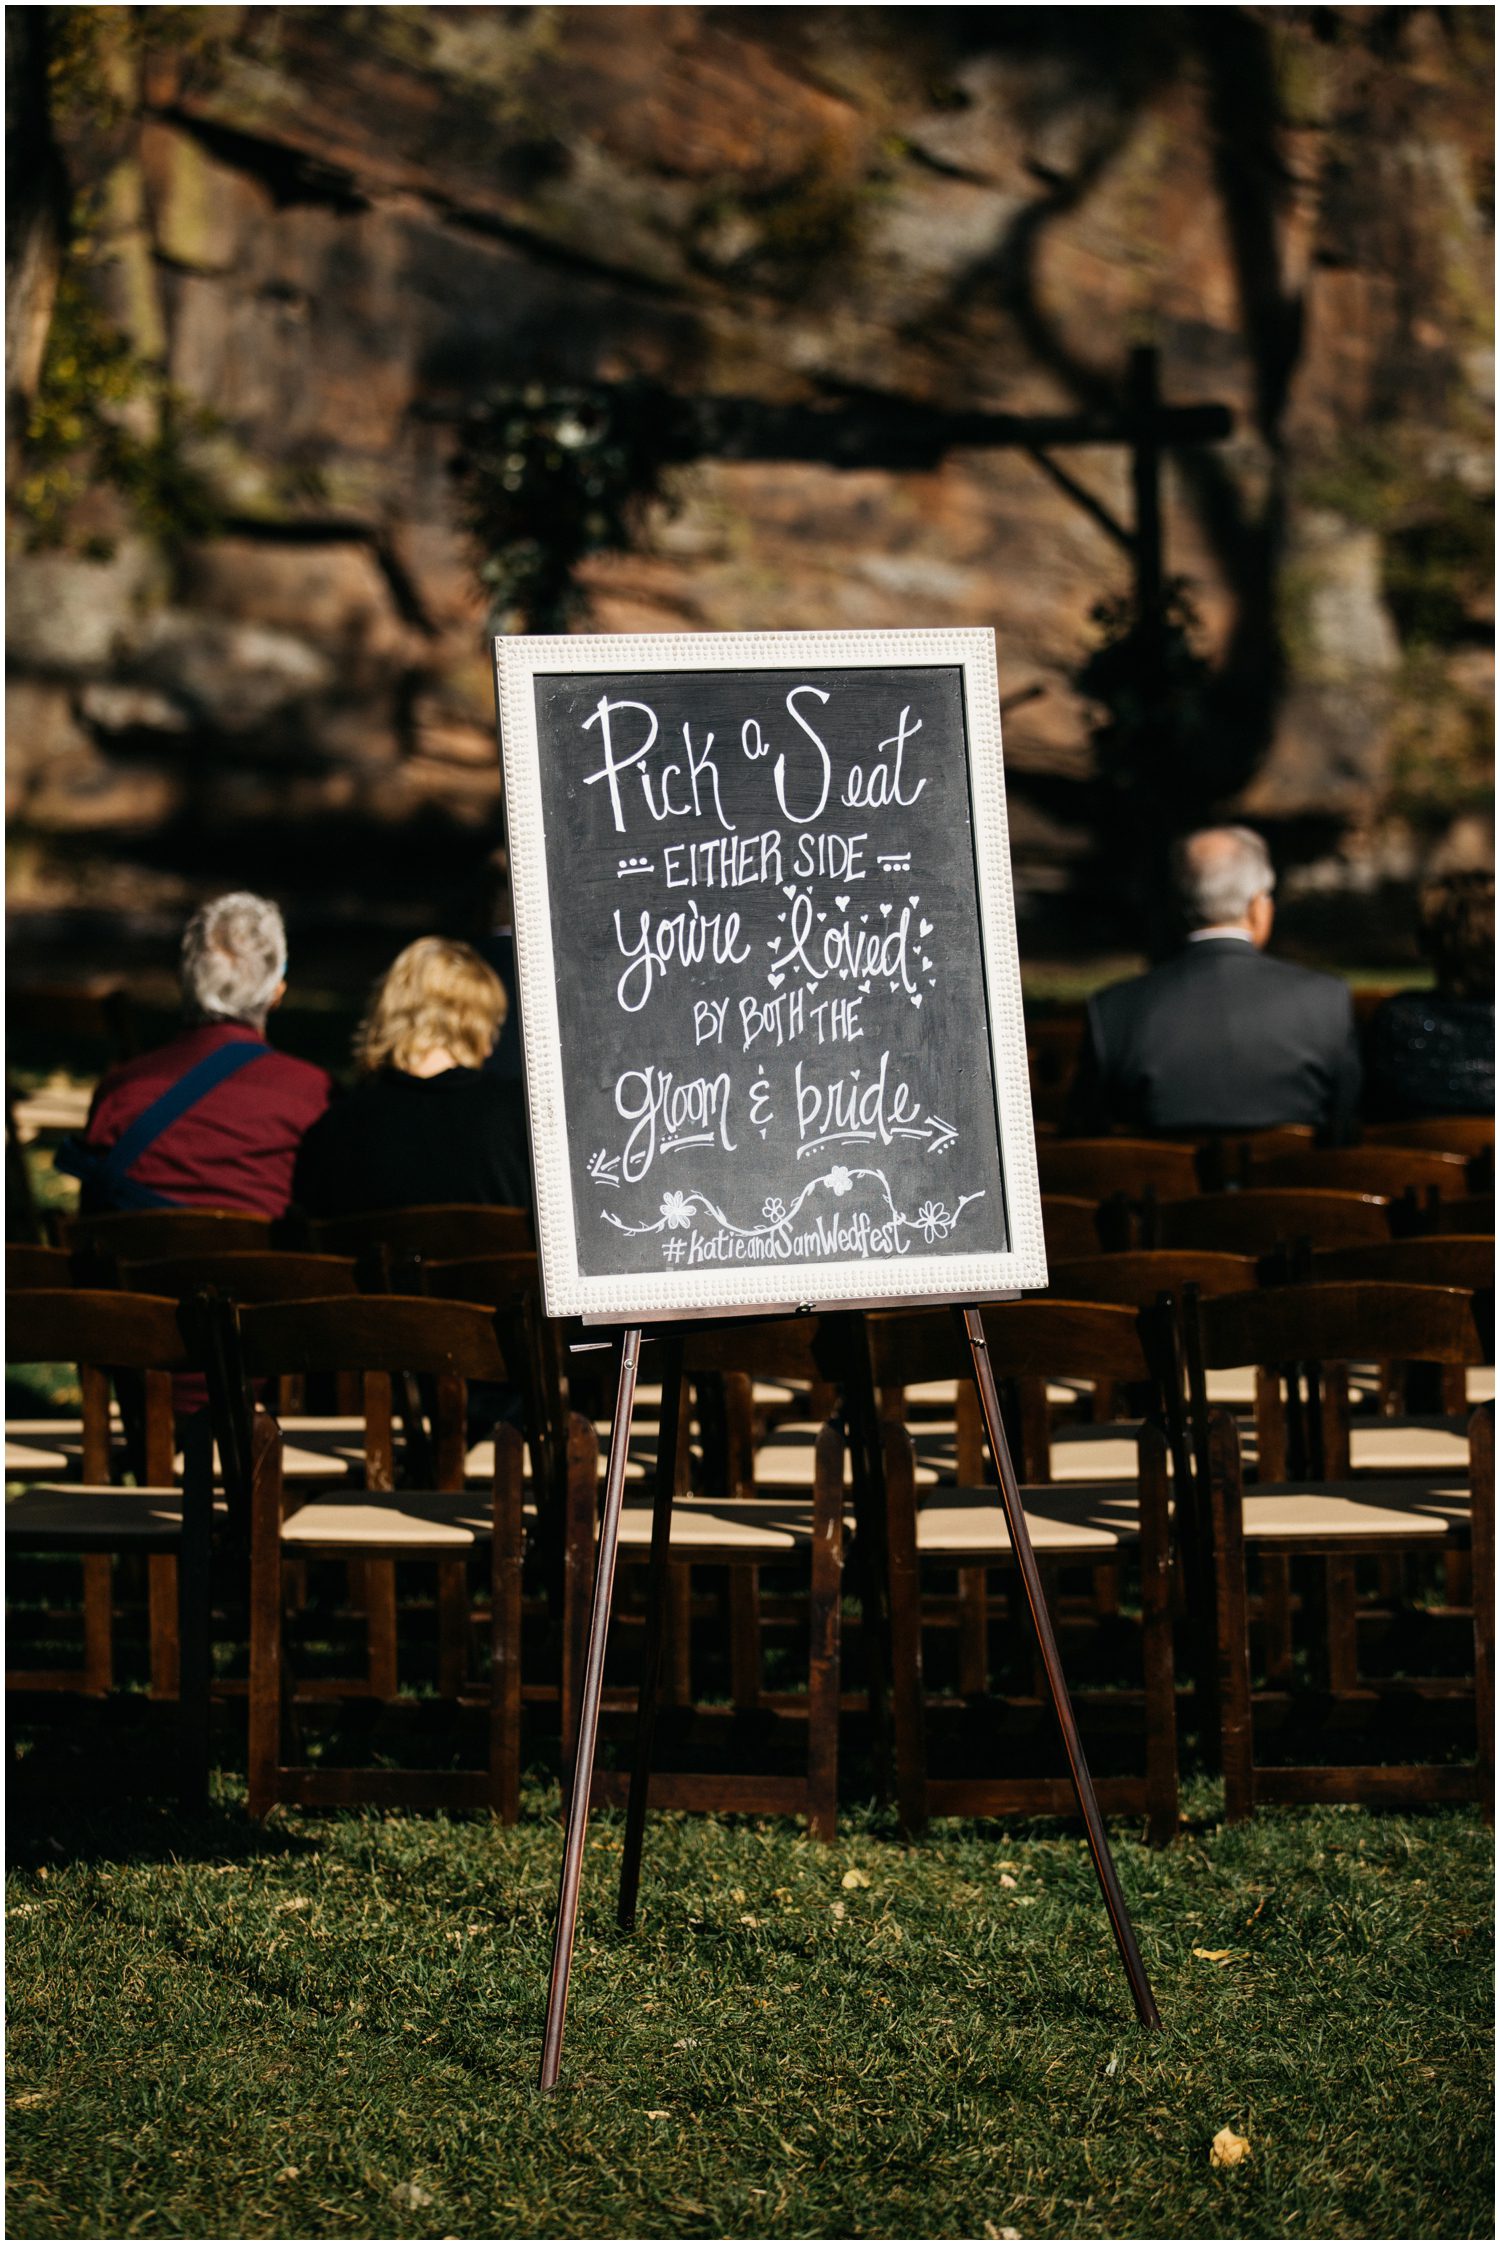 Pick a Seat Not a side sign, Wedding ceremony sign, Wedding sign ideas, Chalkboard sign for wedding, Boho wedding sign, Calligraphy wedding sign, Choose a seat not a side, Youre all loved by the groom and bride, Wedding seating sign, Planet Bluegrass Wedding, Lyons Colorado Wedding, Lace and Lillies, Colorado Wedding Photographer, A Spice of Life, Boho Wedding Inspiration, Burgundy wedding inspiration, Colorado Wedding